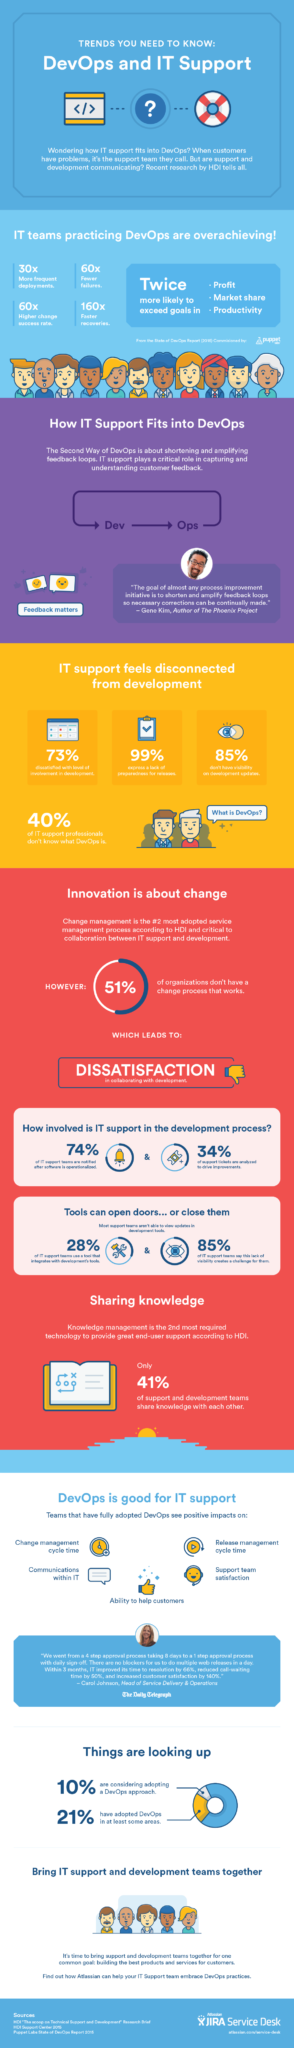 DevOps and IT infographic